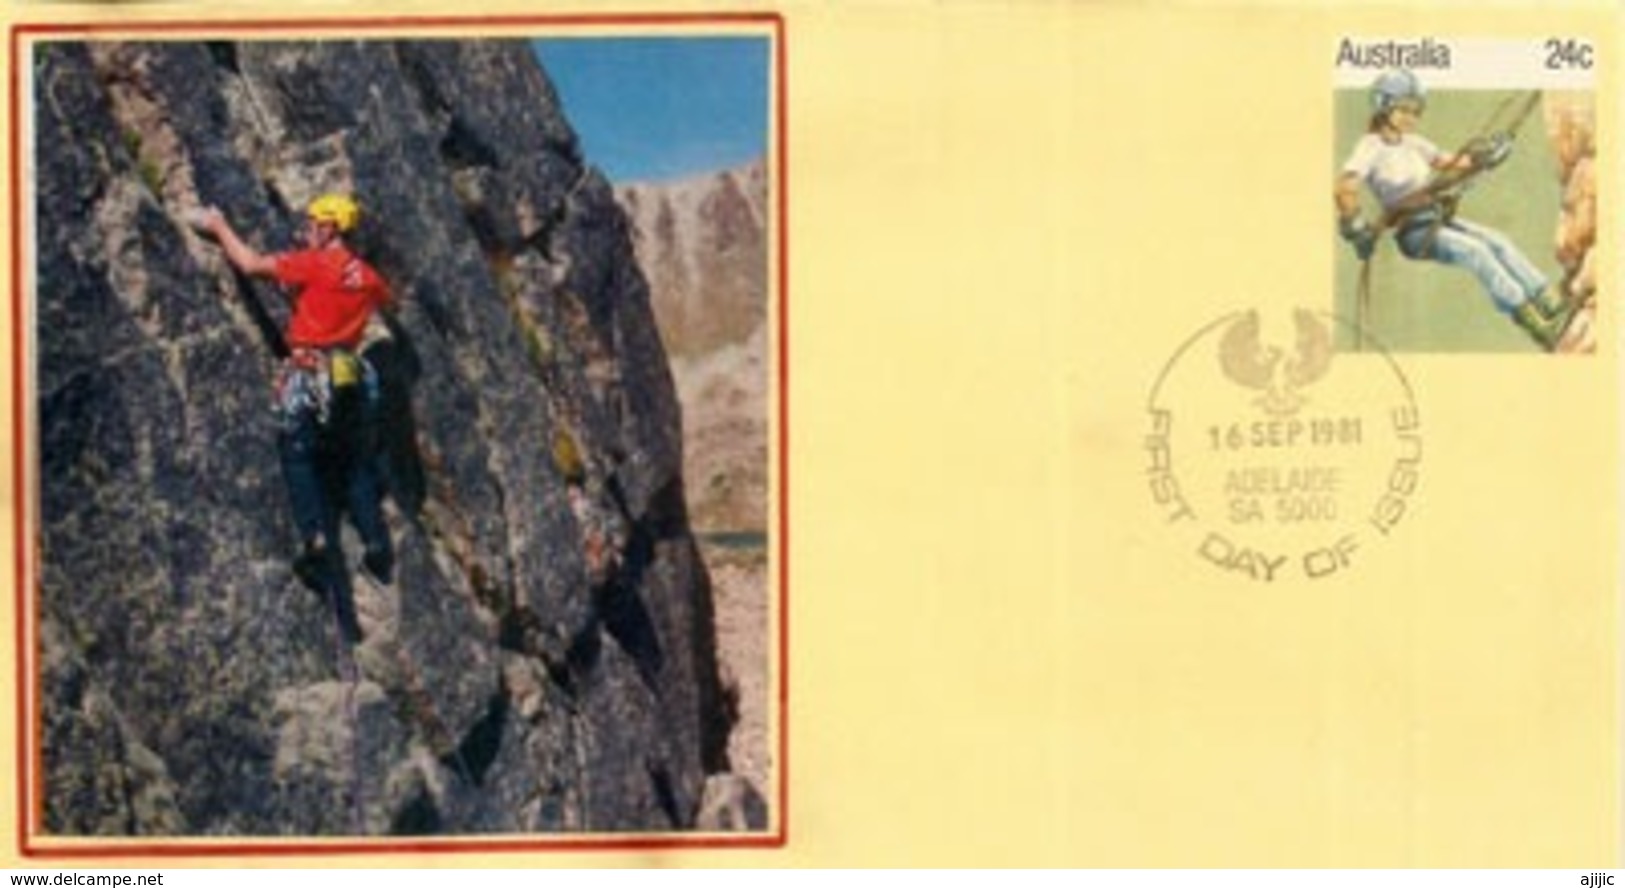 AUSTRALIA. Mountain Climbing.“mountaineering”, Special Cover. Postal Stationery 1981 - Klimmen